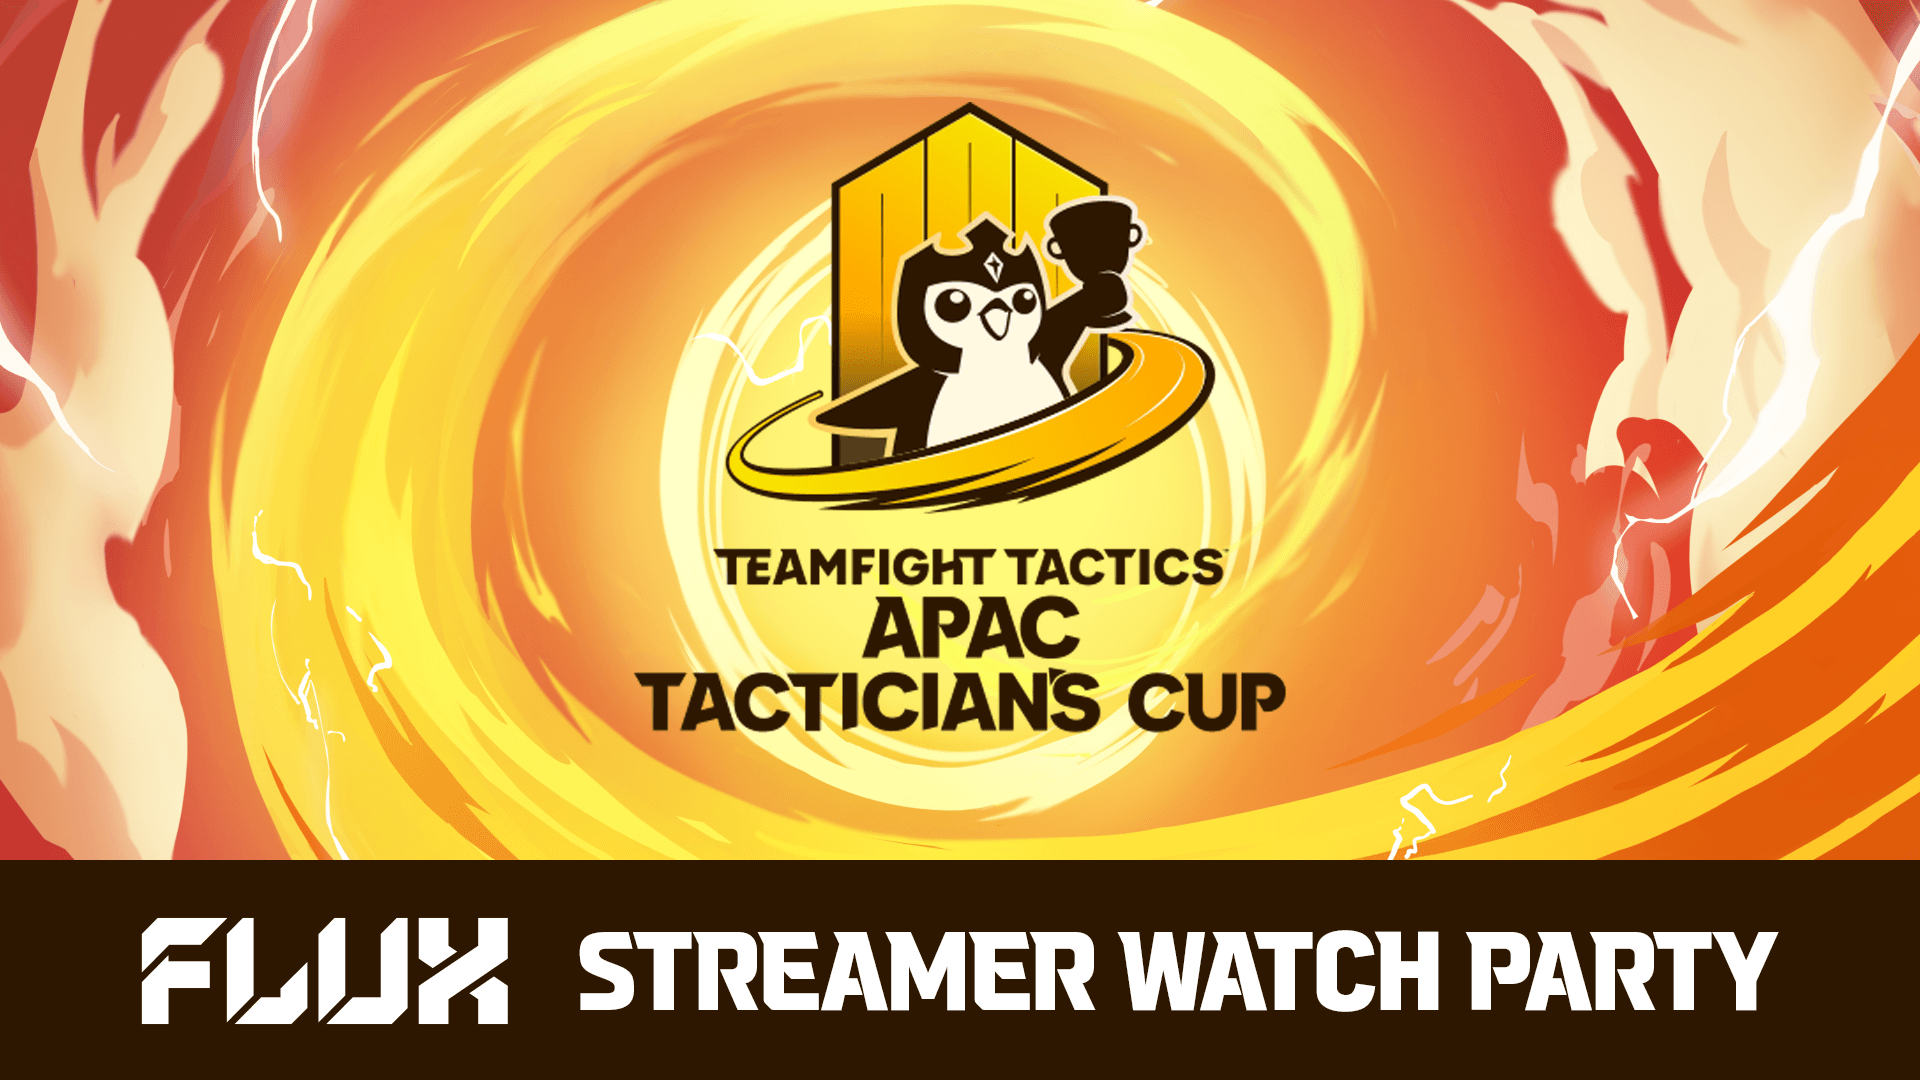 FLUX STREAMER WATCH PARTY Tactician’s Cup III feature image